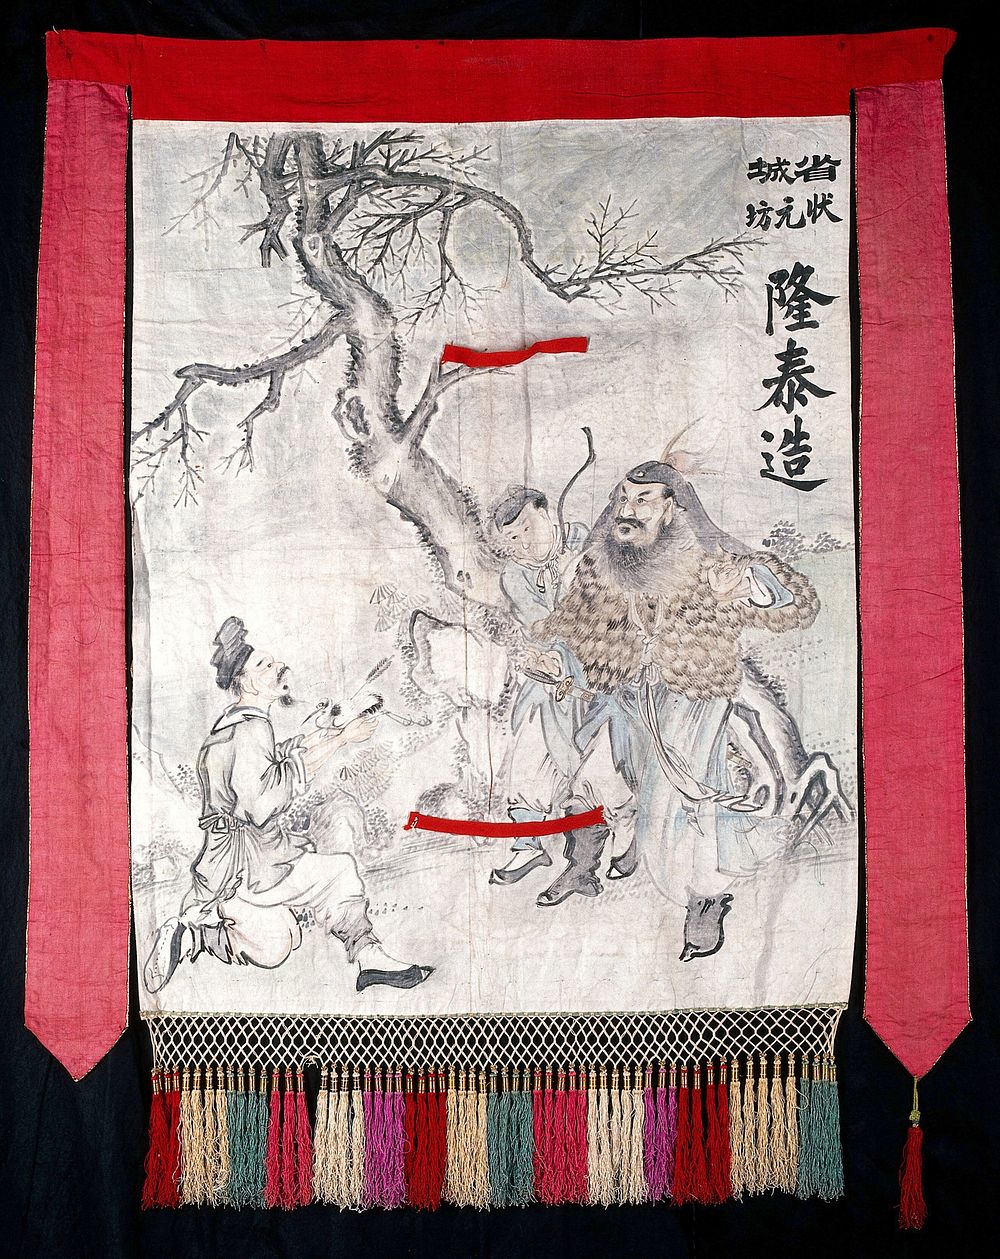 Two figures. Painting and embroidery by a Chinese artist or artists.